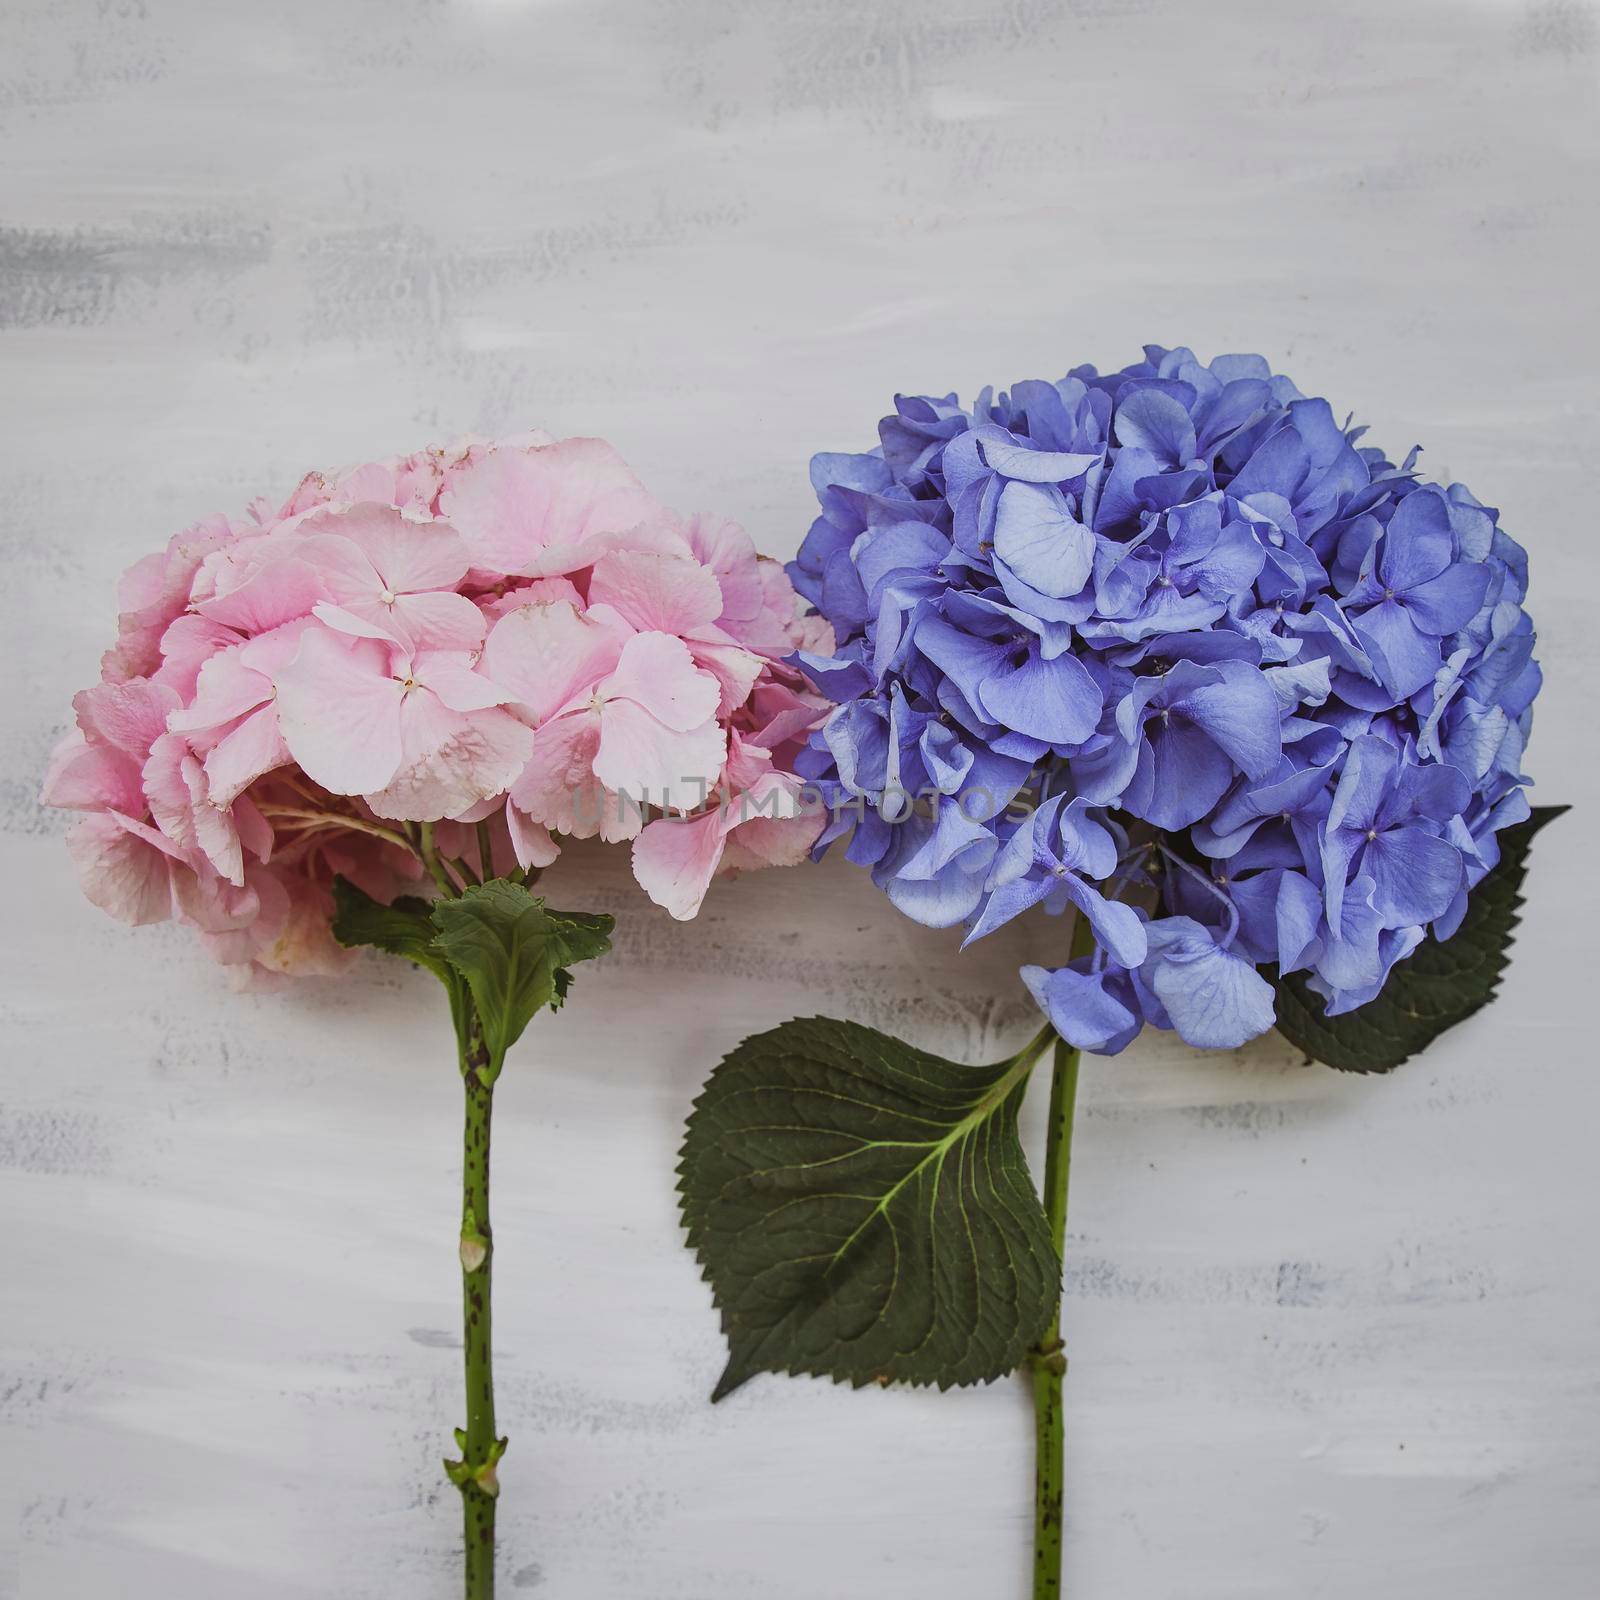 Pastel colored Hydrangea Flowers on White painted table by kisika